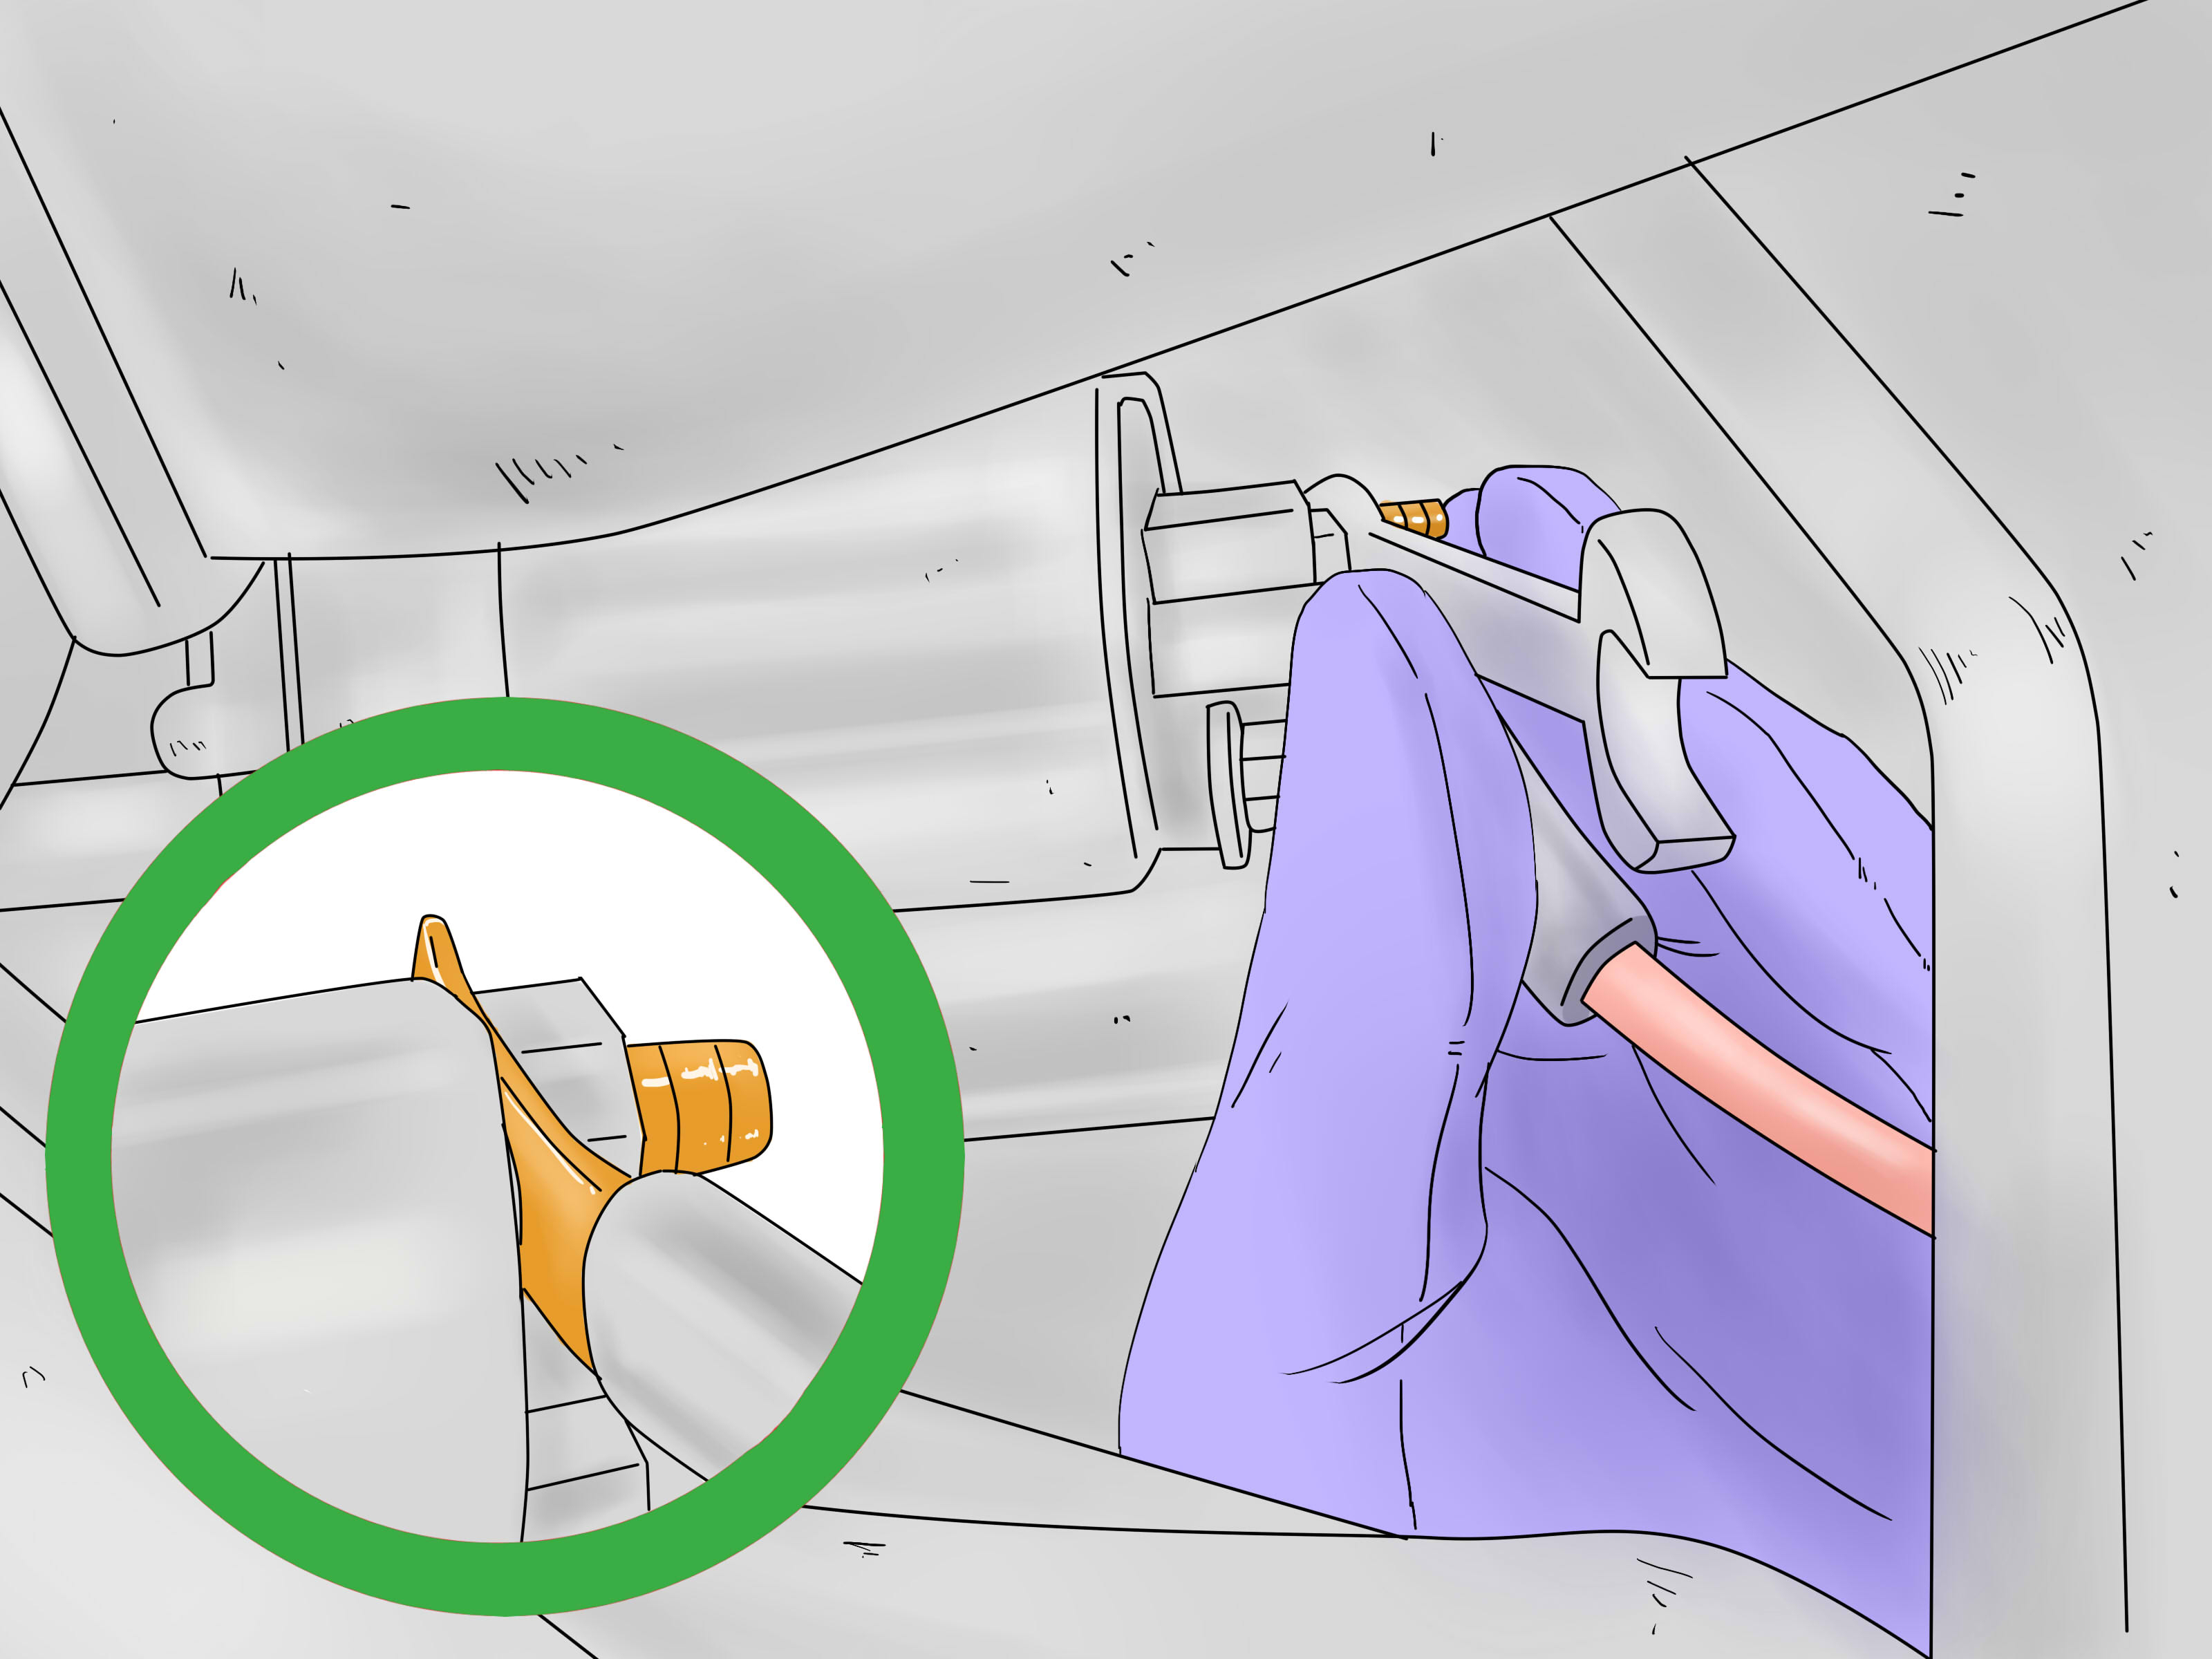 3 Quick And Easy Ways To Hotwire Your Car - Wikihow - Chevy 350 Ignition Coil Wiring Diagram